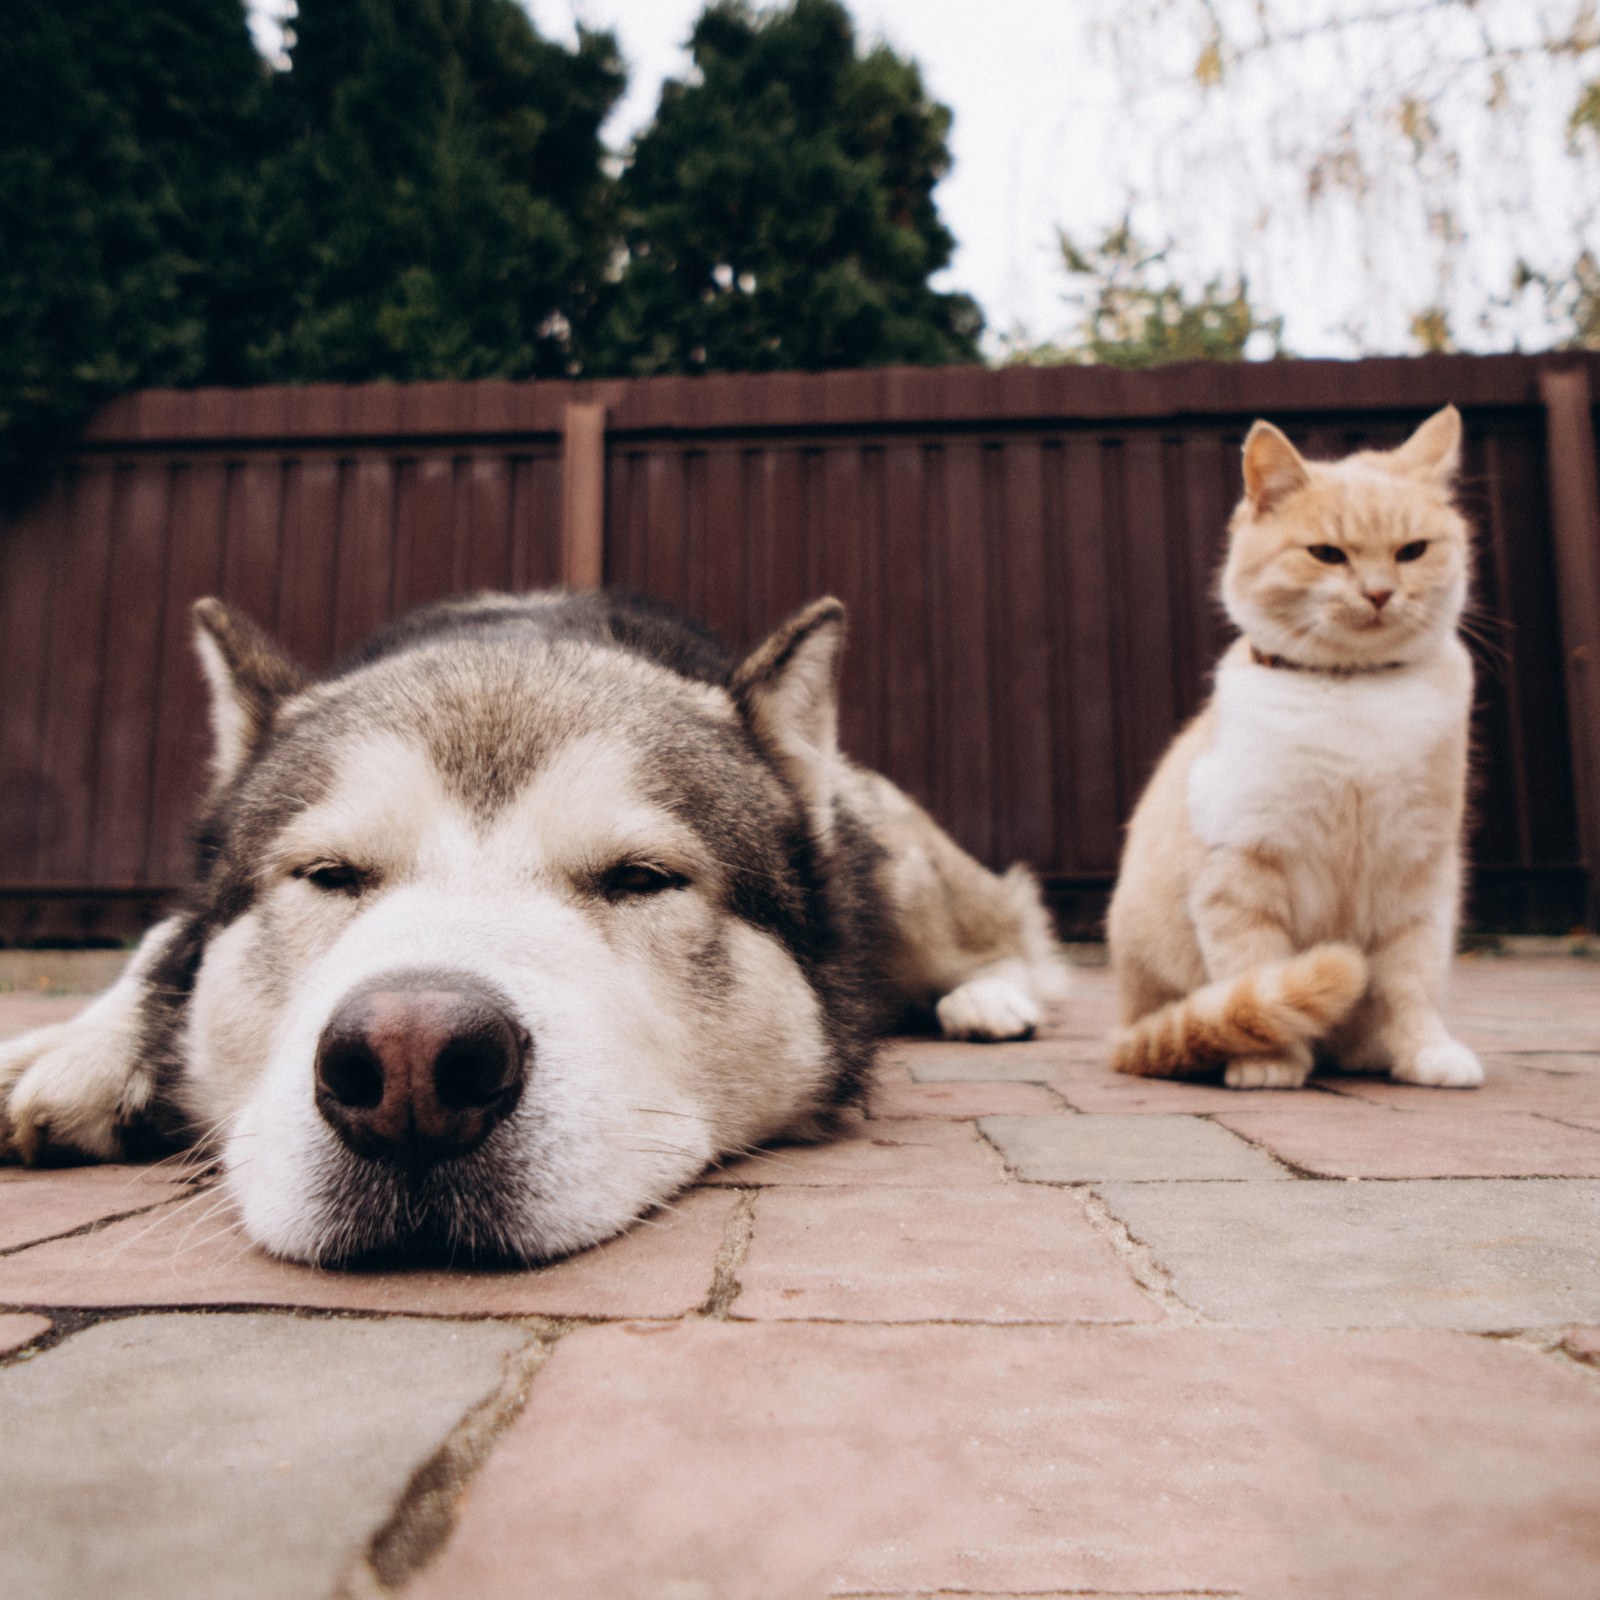 Husky Who 'Doesn't Understand' Why Cat Won't Play With Him Melts Hearts